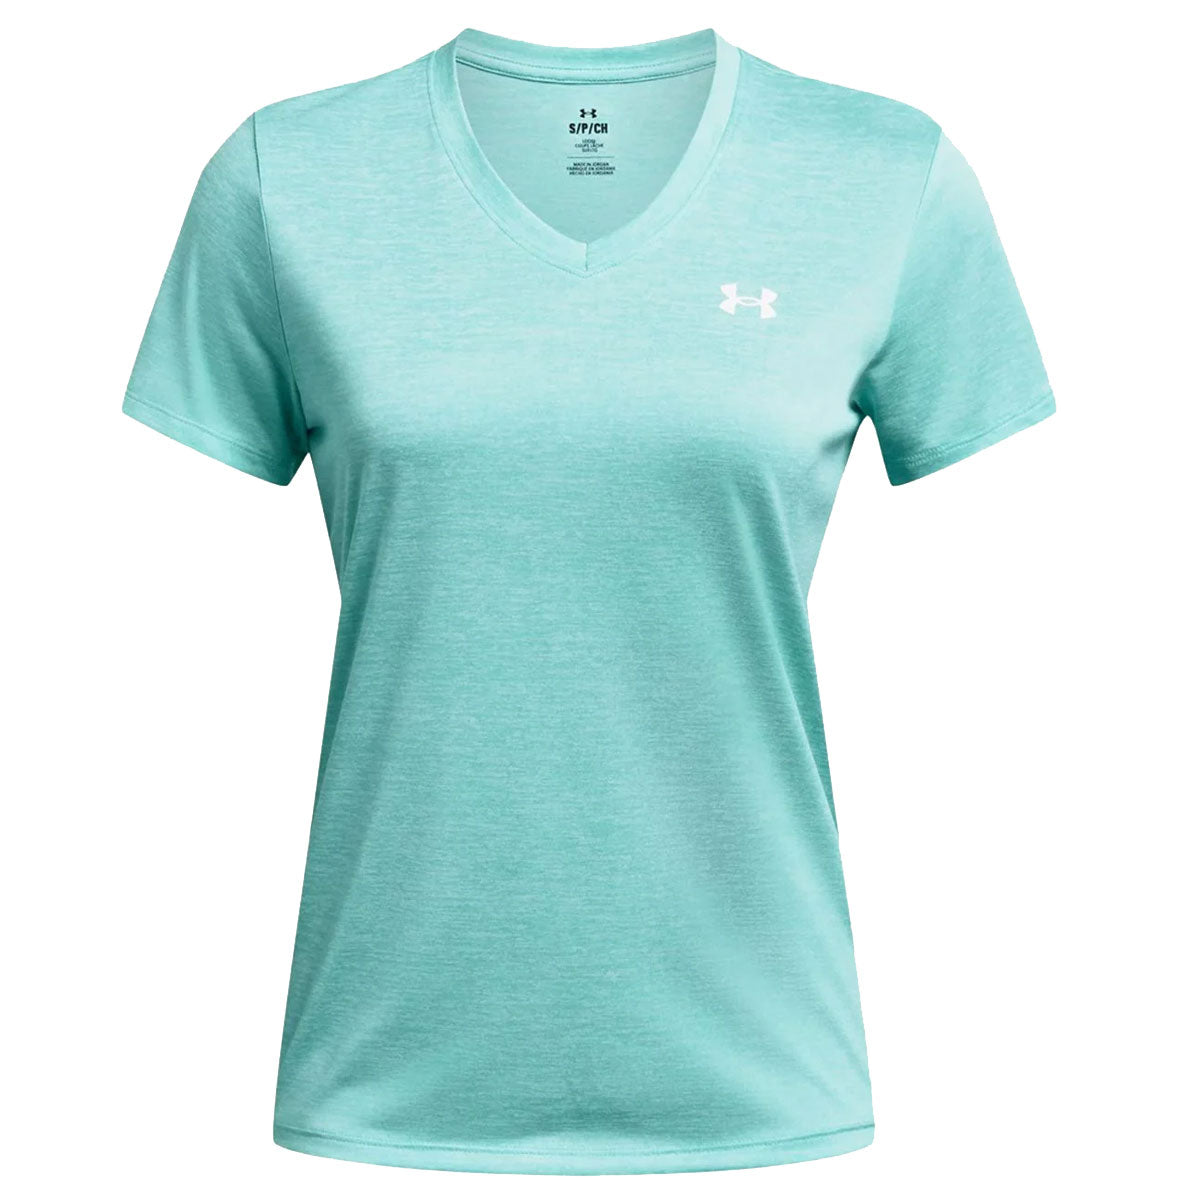 Under Armour Tech Twist V-Neck Short Sleeve Tee - Womens - Radial Turquoise/White